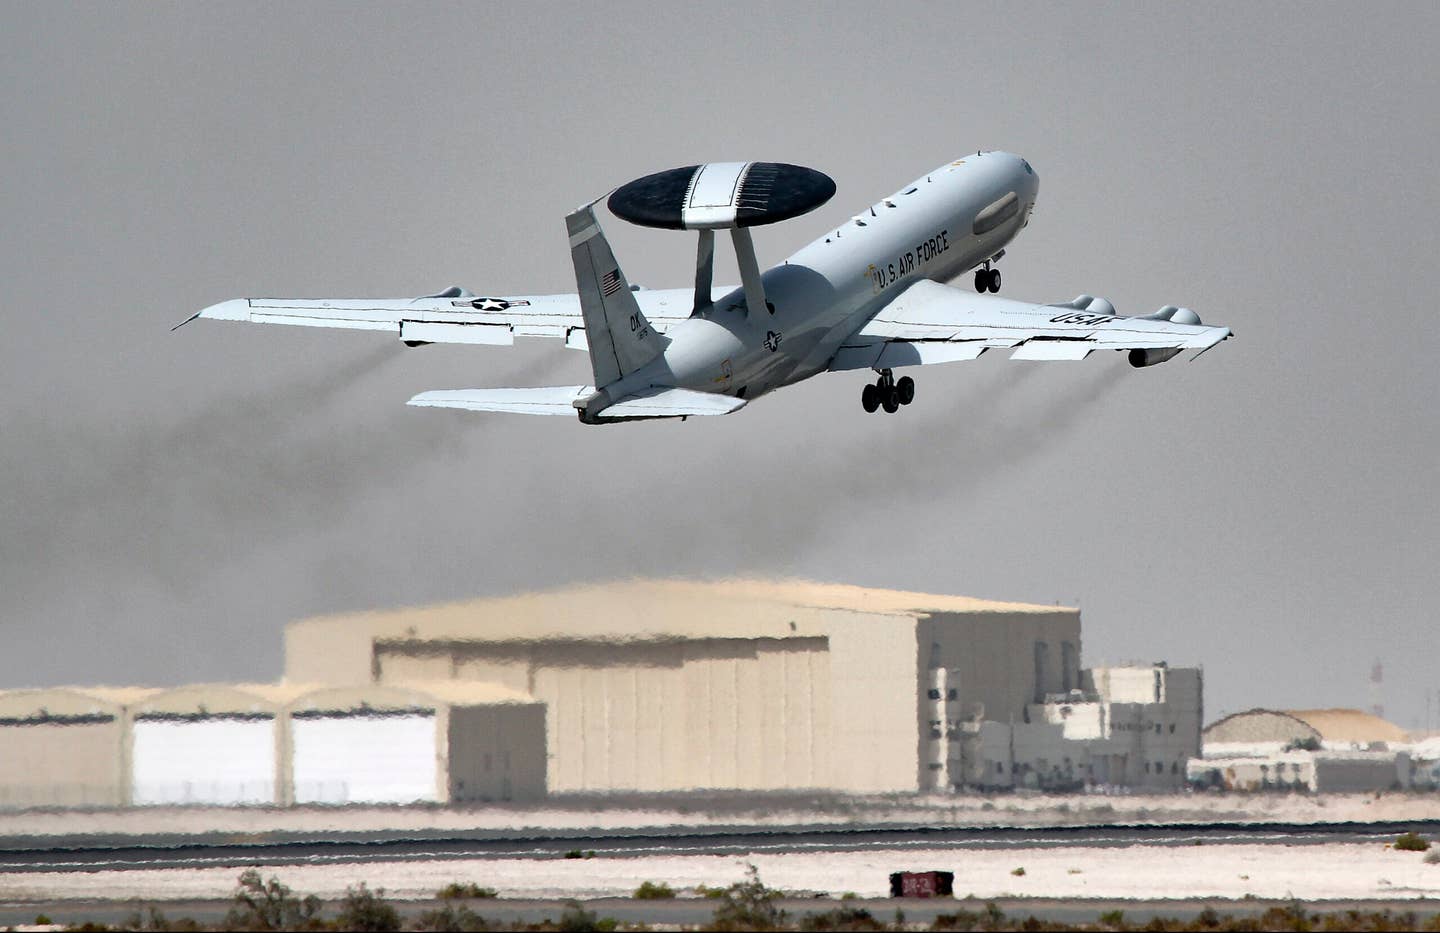 A U.S. Air Force E-3 Sentry takes off from Al Dhafra Air Base, United Arab Emirates, March 6, 2022. (U.S. Air Force photo by Master Sgt. Dan Heaton)